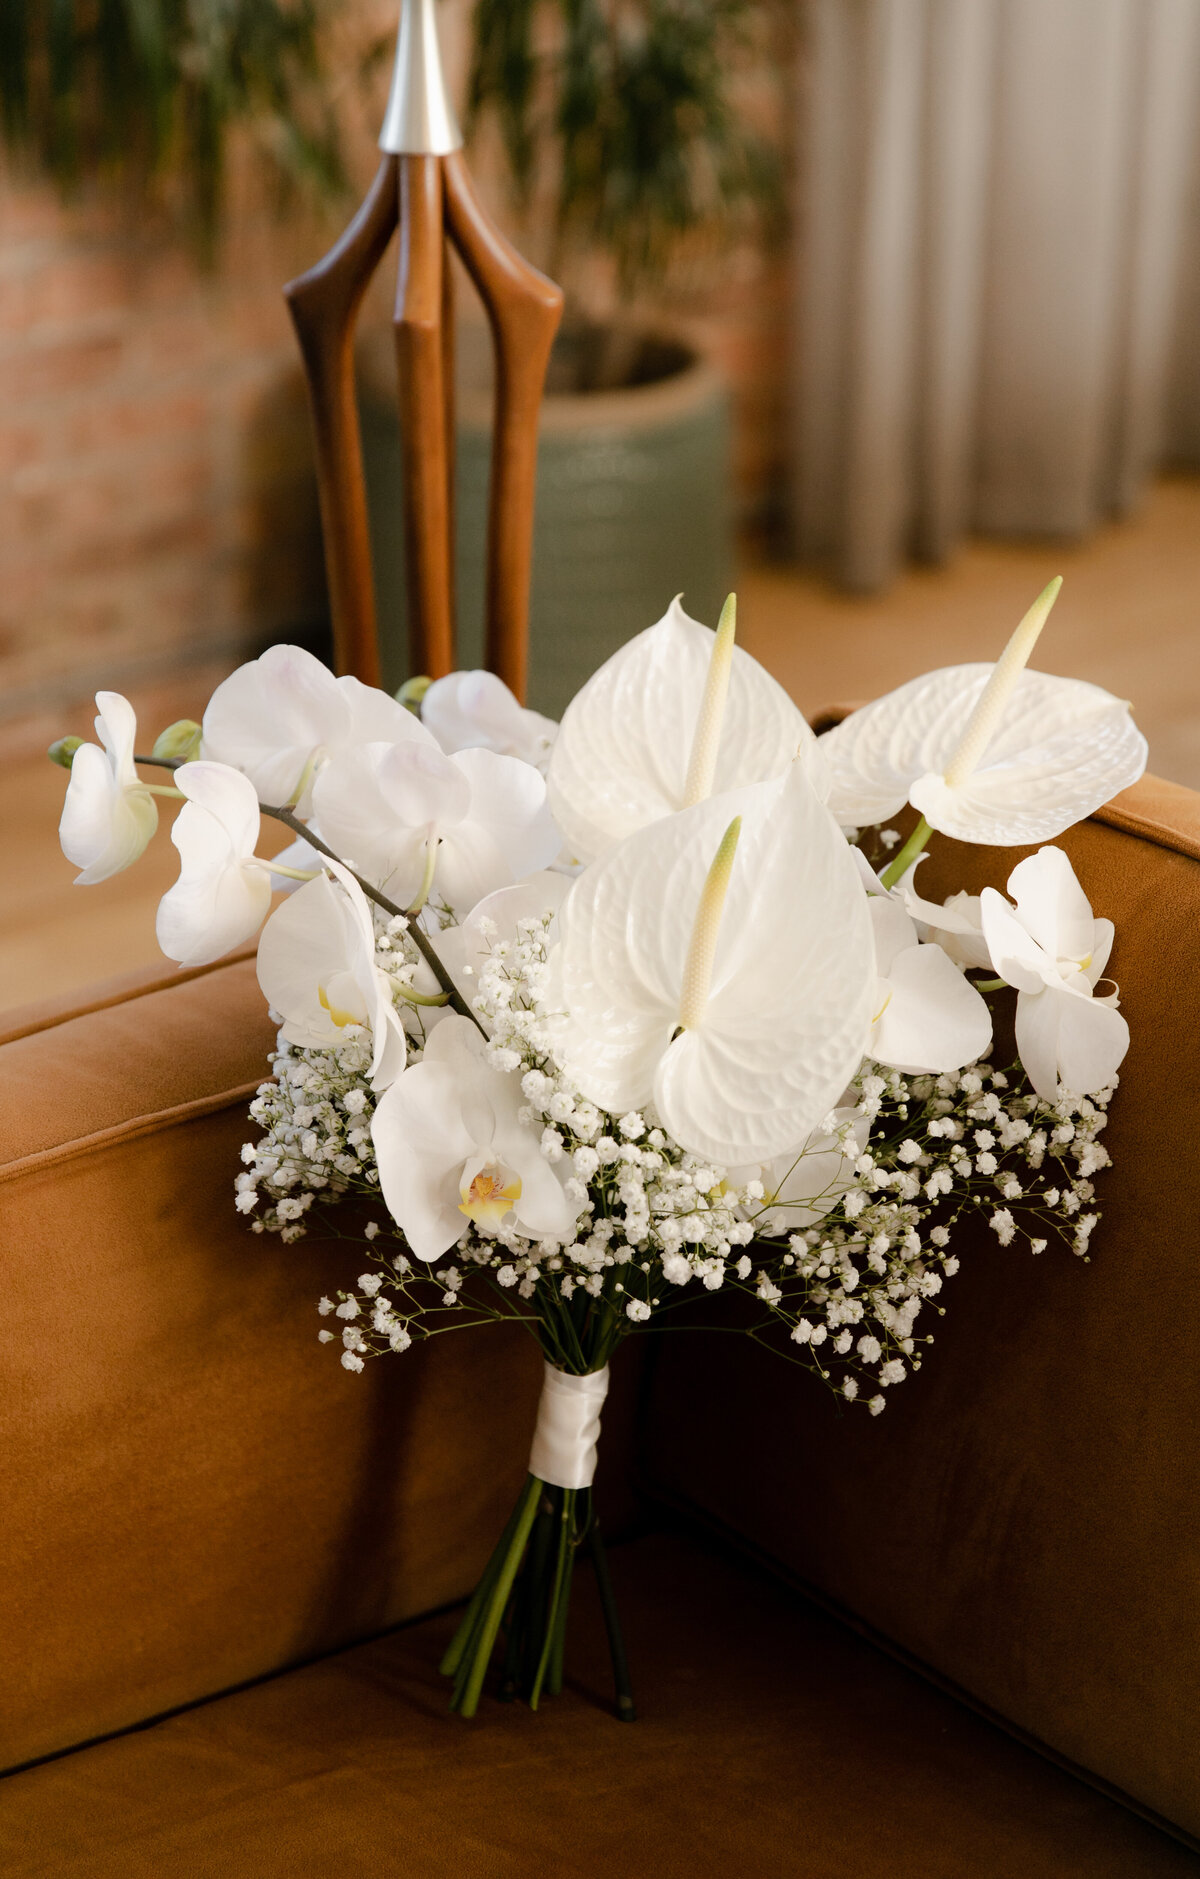 White lilies and baby's breath wedding  bouquet pictured atop brown leather couch at Moody Tongue Brewery in Chicago.